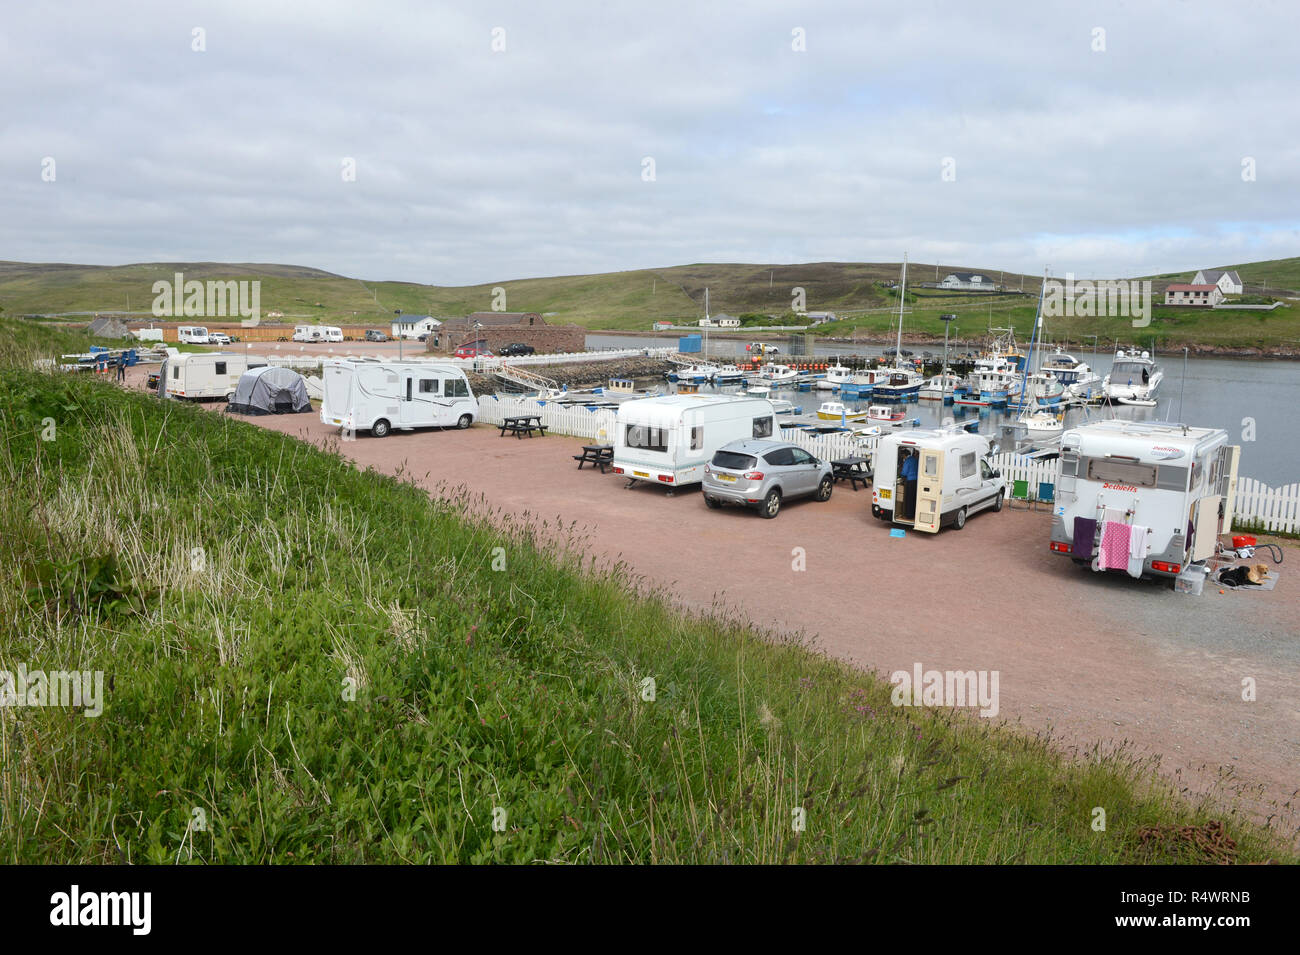 Skeld camping and caravan park in the Shetland Isles with pitches for campers, caravans and mobile homes Stock Photo